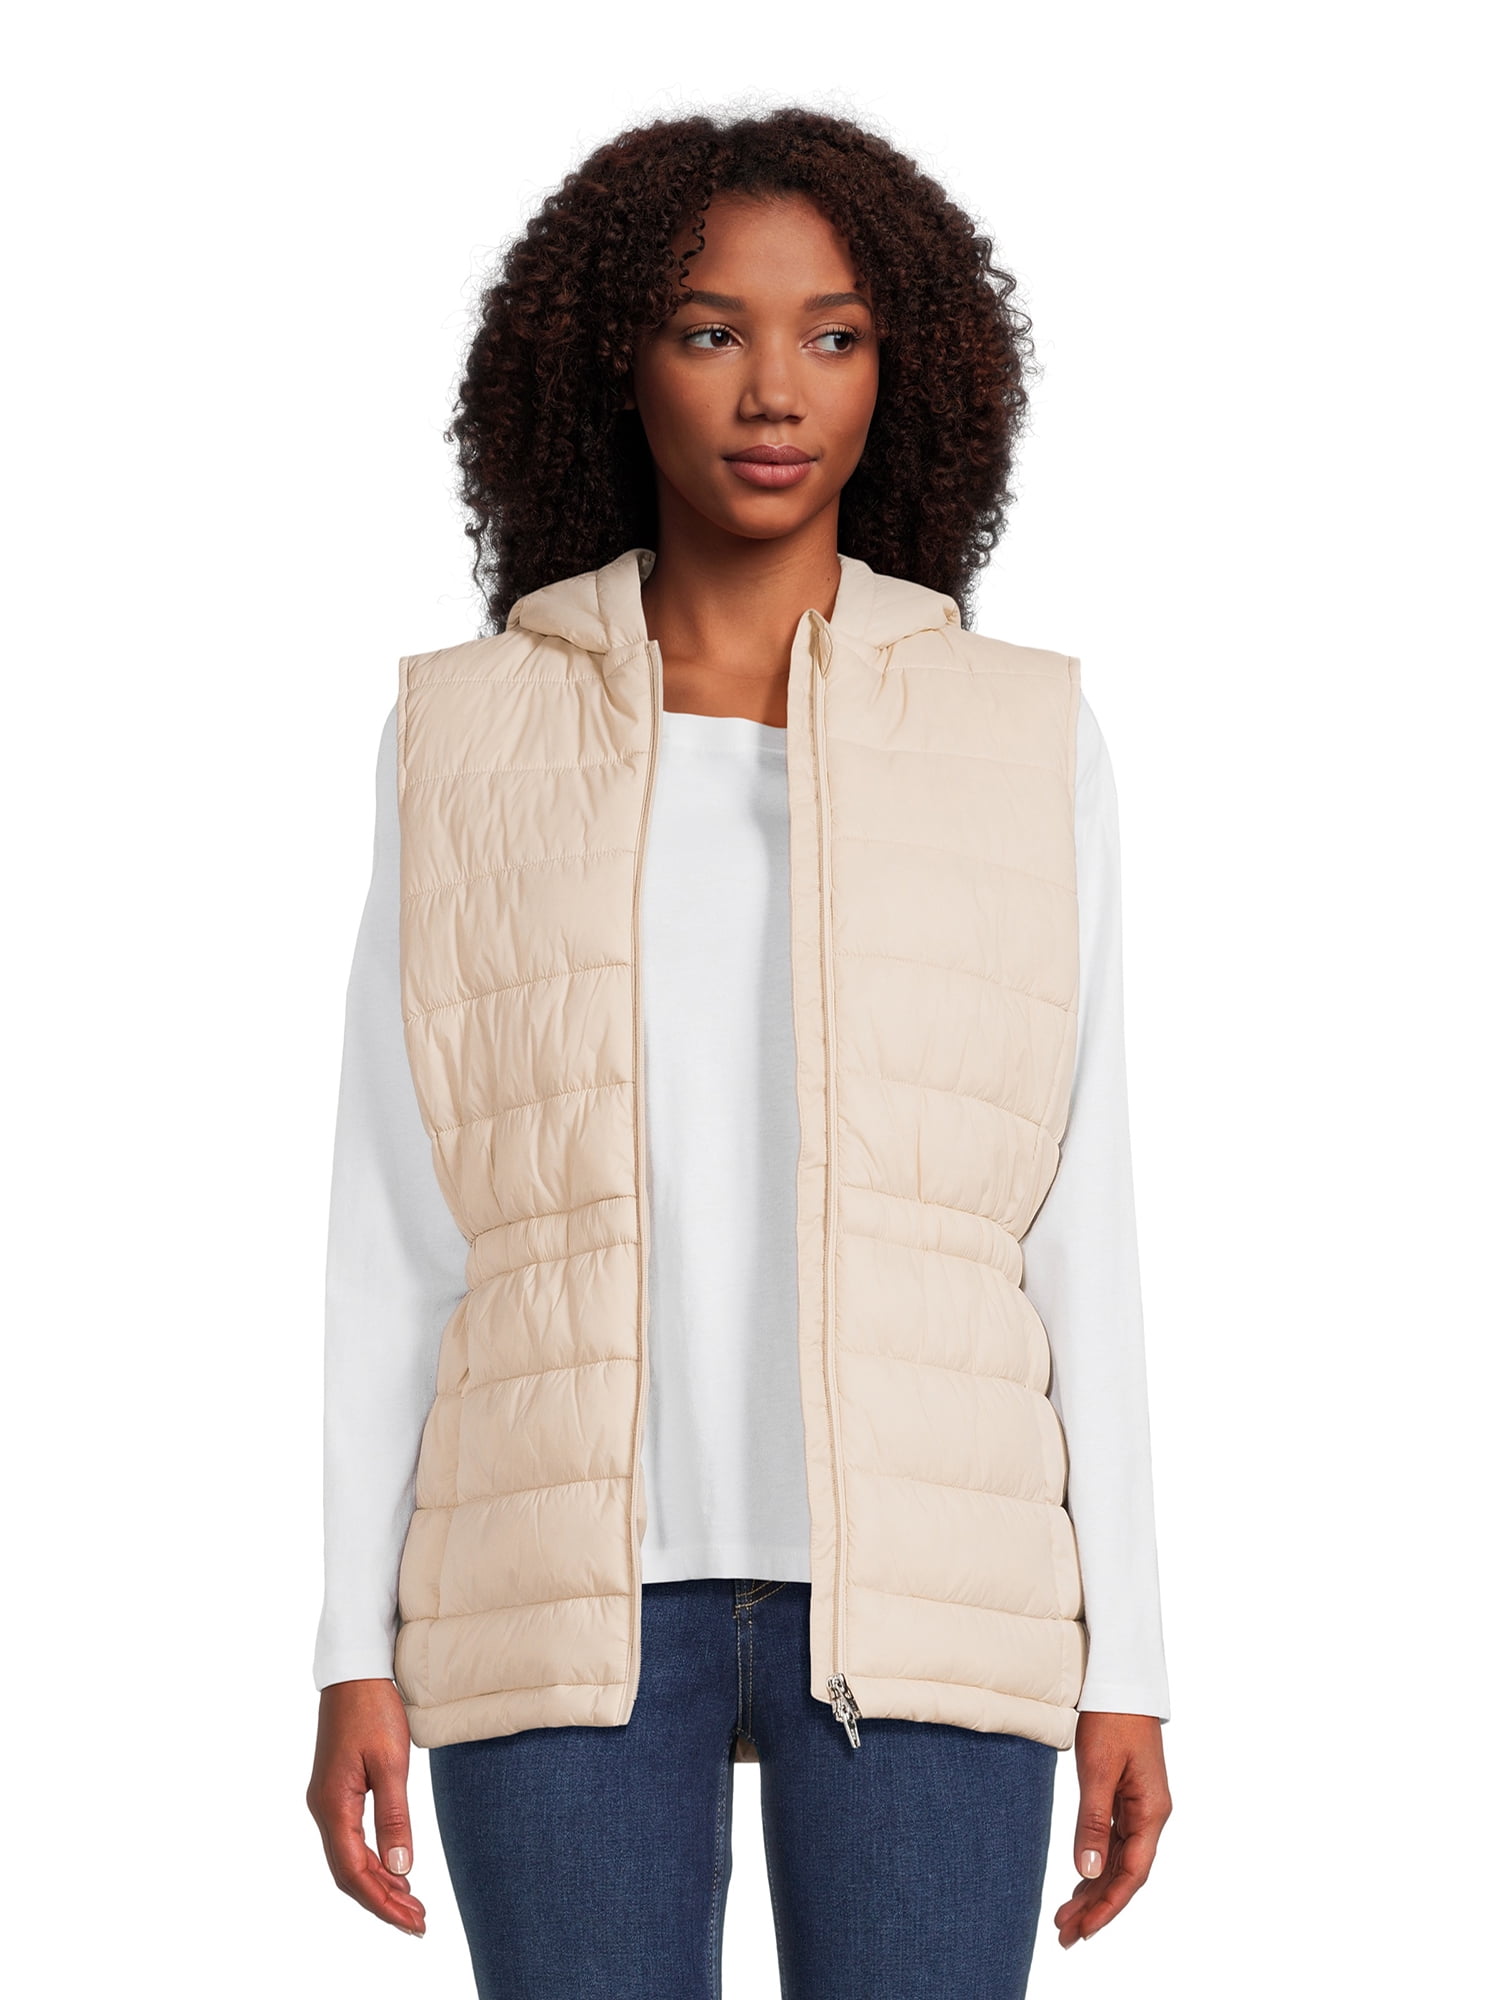 Swiss Tech Women's Hooded Vest with Cinched Waist, Sizes XS-3X ...